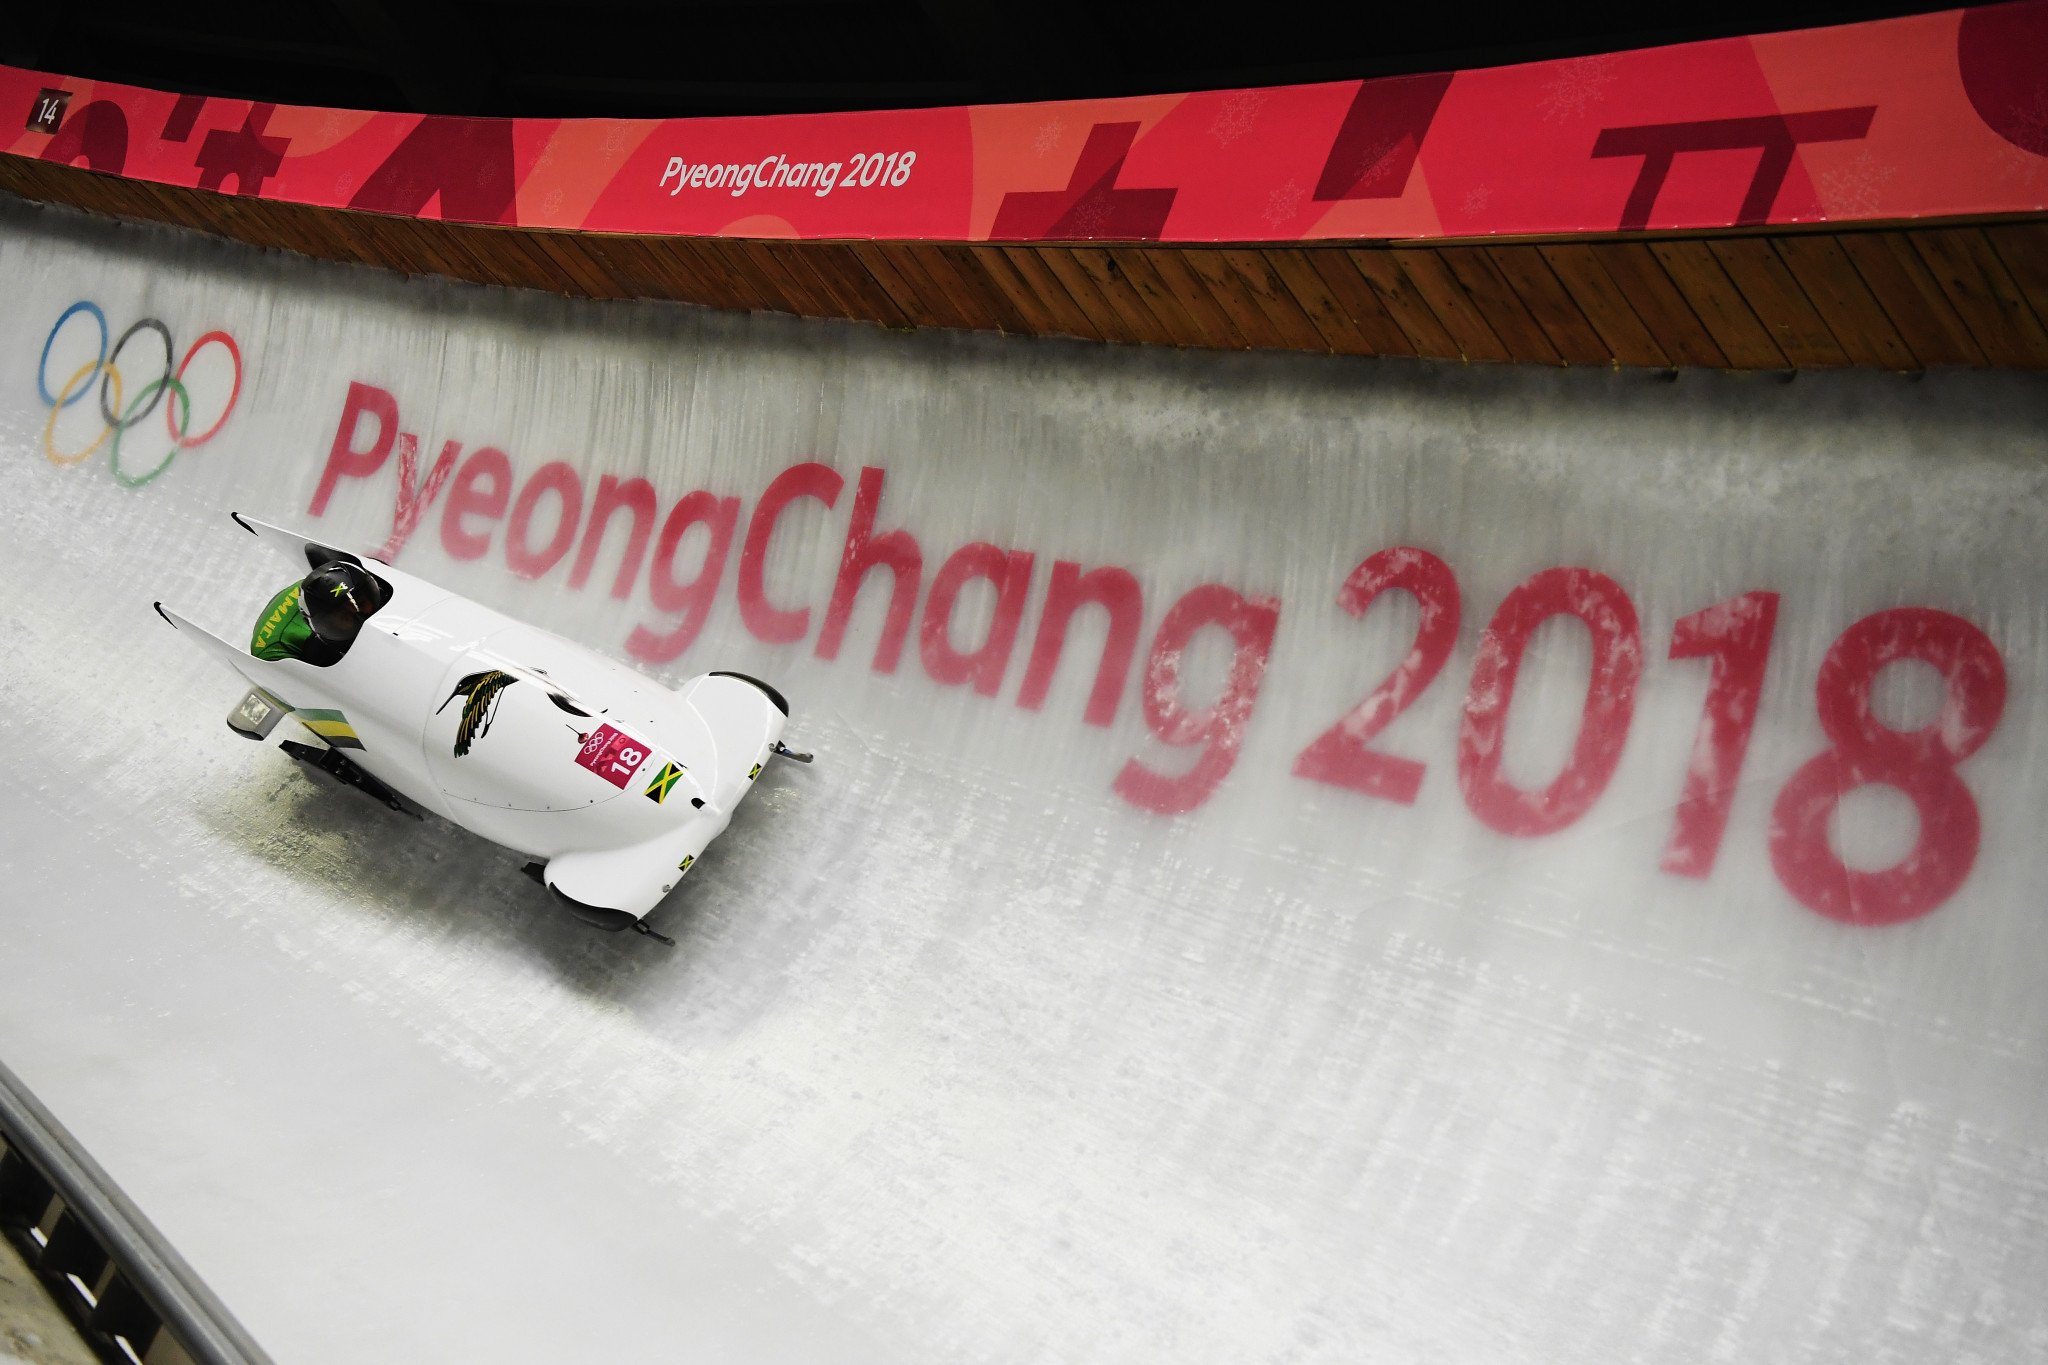 Jazmine Fenlator-Victorian and Carrie Russell were the members of the two-woman team which finished 19th at Pyeongchang 2018 as Jamaica's women made their Olympic bobsleigh debut ©Getty Images